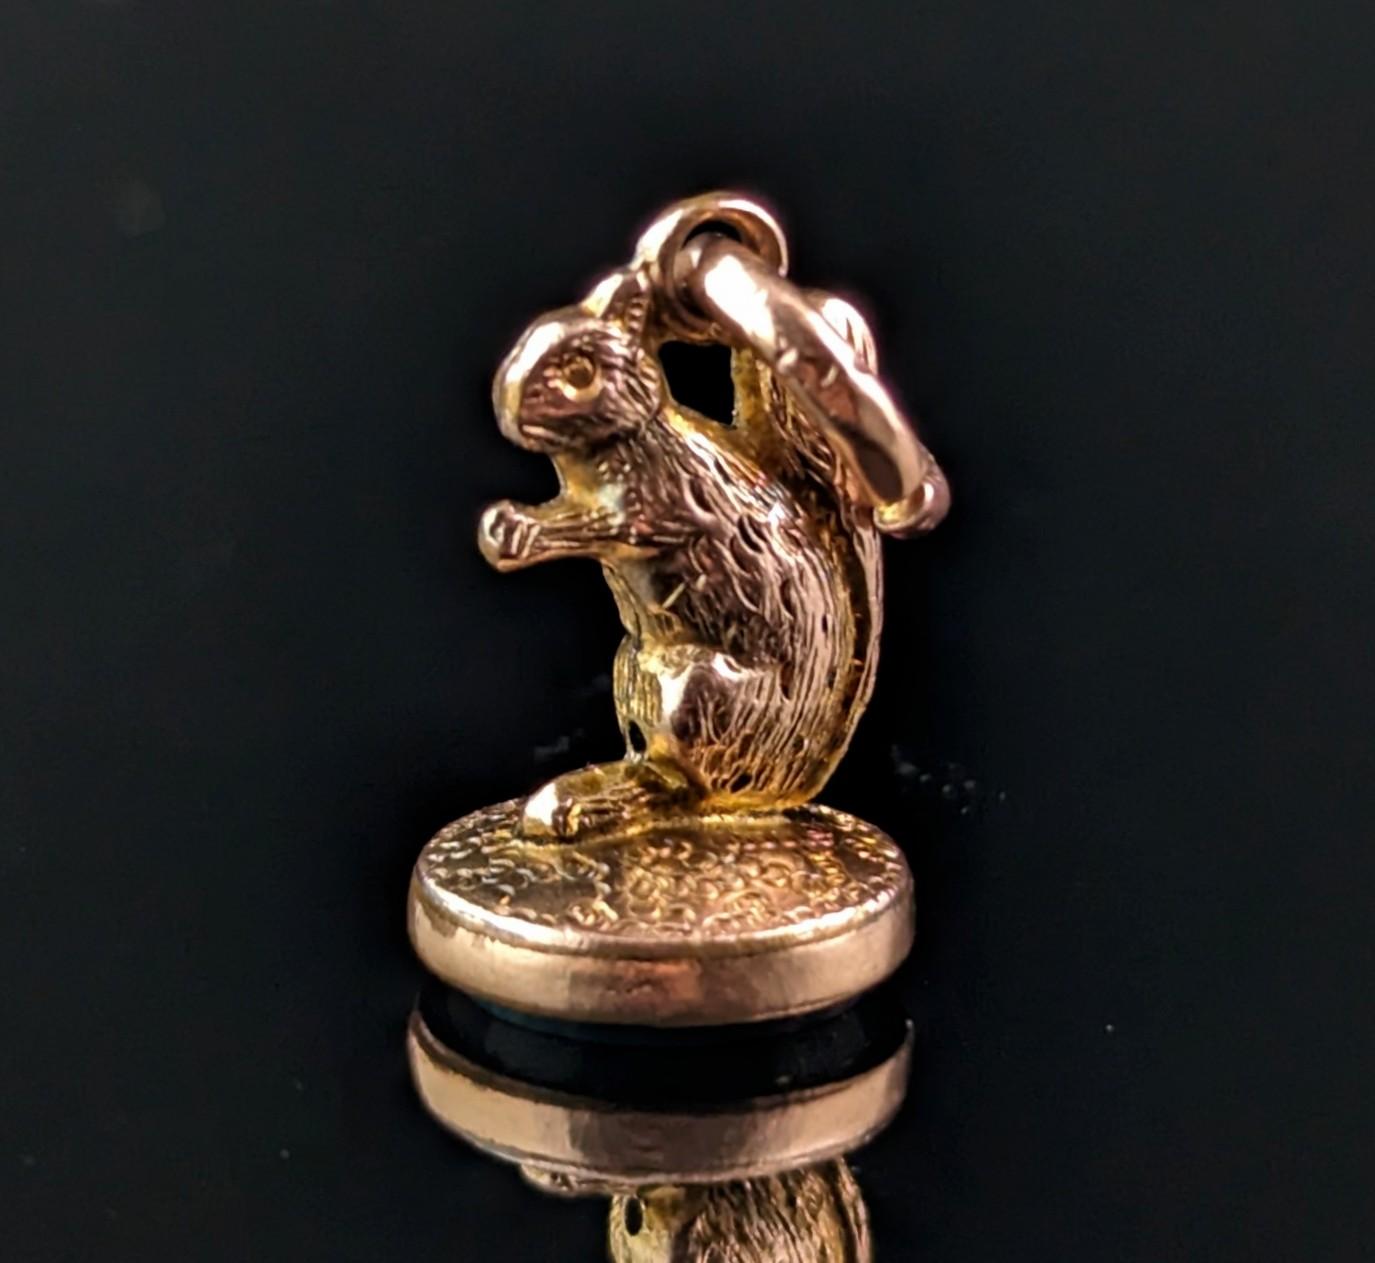 The sweetest little antique 9ct gold squirrel seal fob charm.

It is finely modelled in aged 9ct yellow gold as a little squirrel, it has its arms raised as if holding a nut and the base is set with a small faux bloodstone glass seal.

The charm is